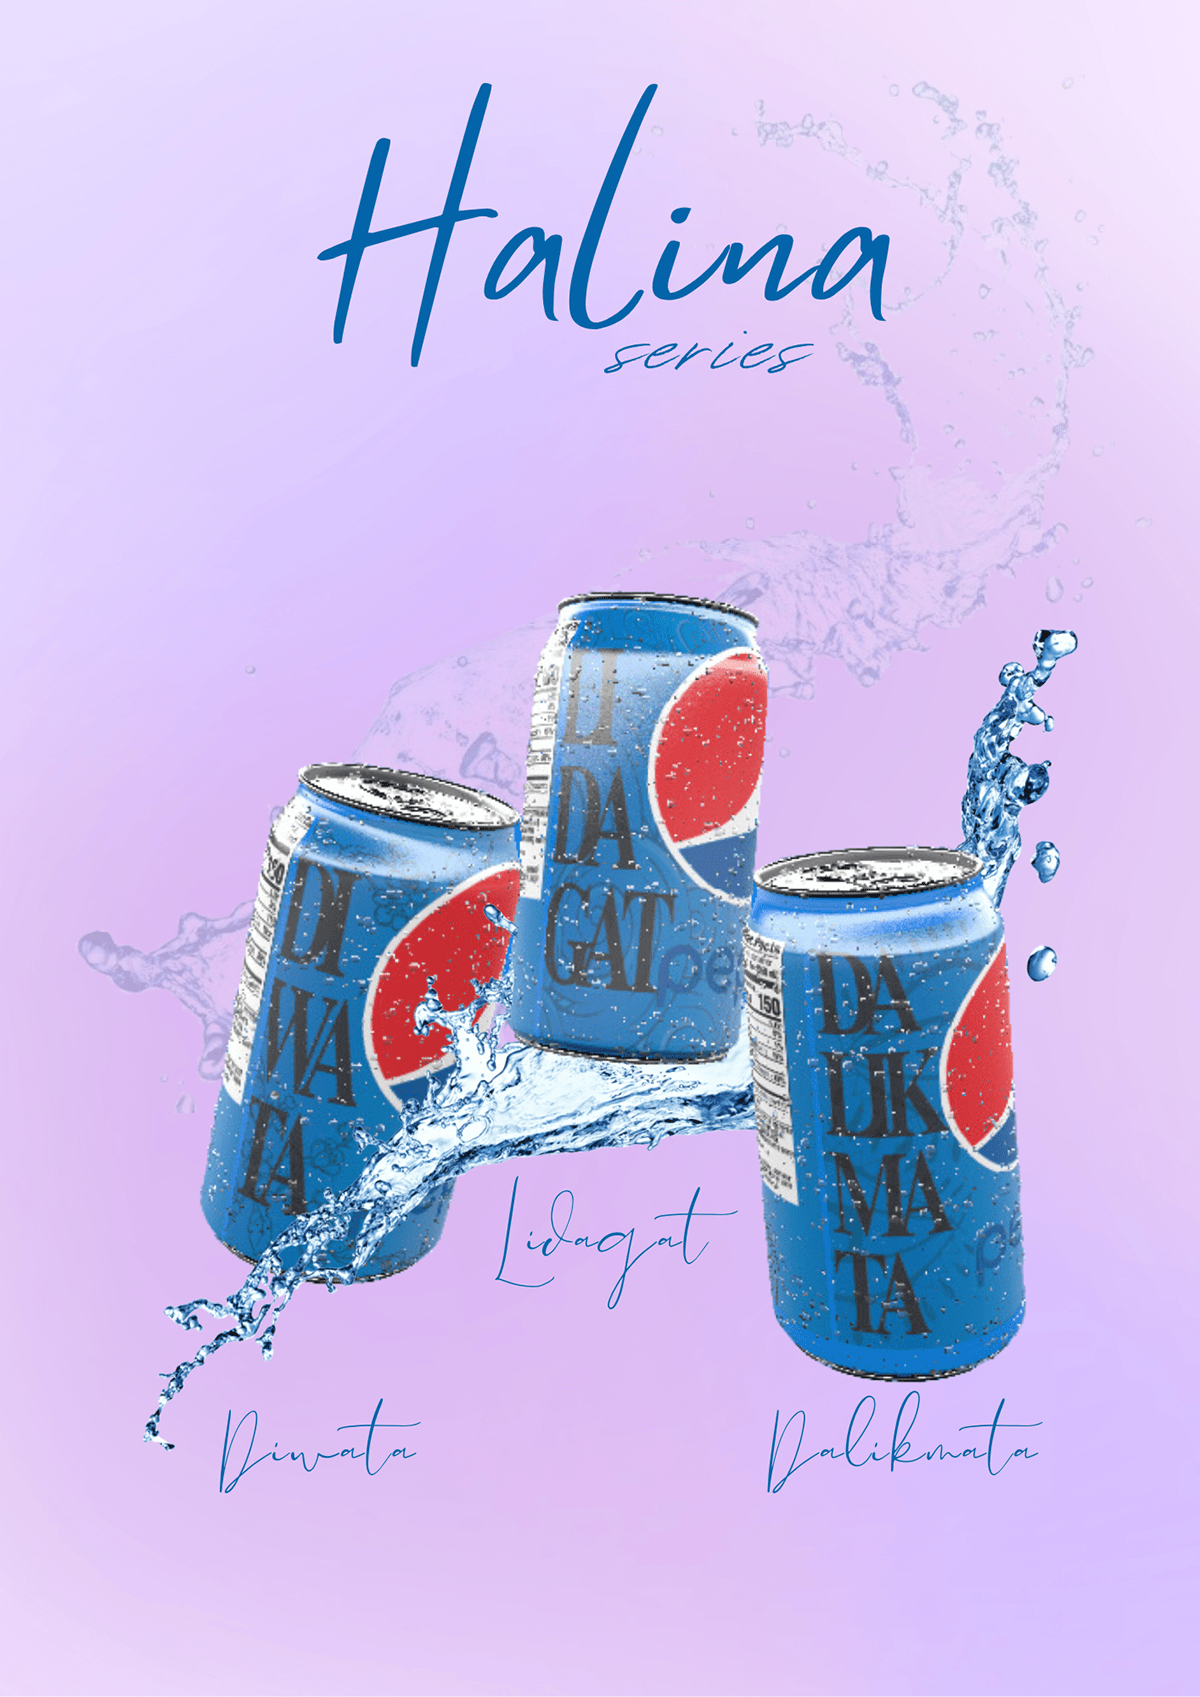 Concept for Pepsi Limited-Edition cans. on Behance